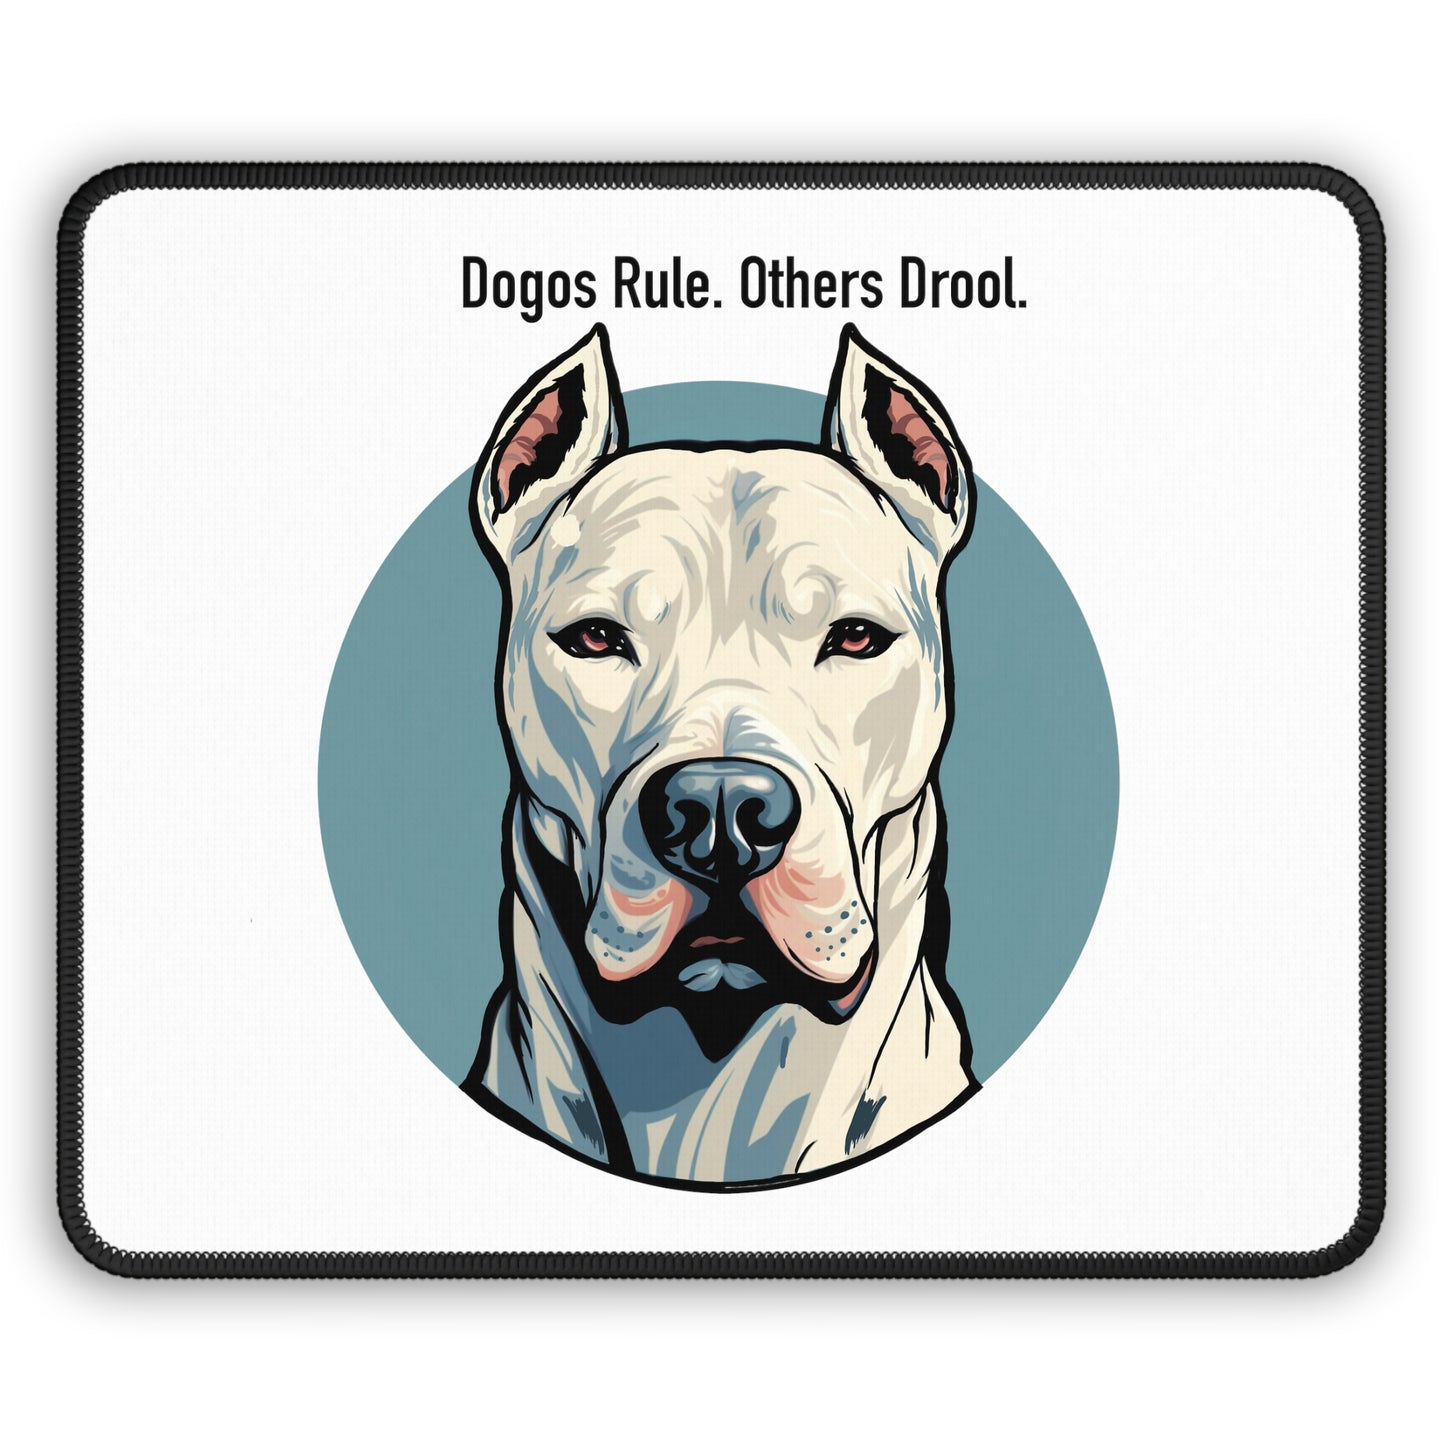 Dogos Rule Others Drool Gaming Mouse Pad